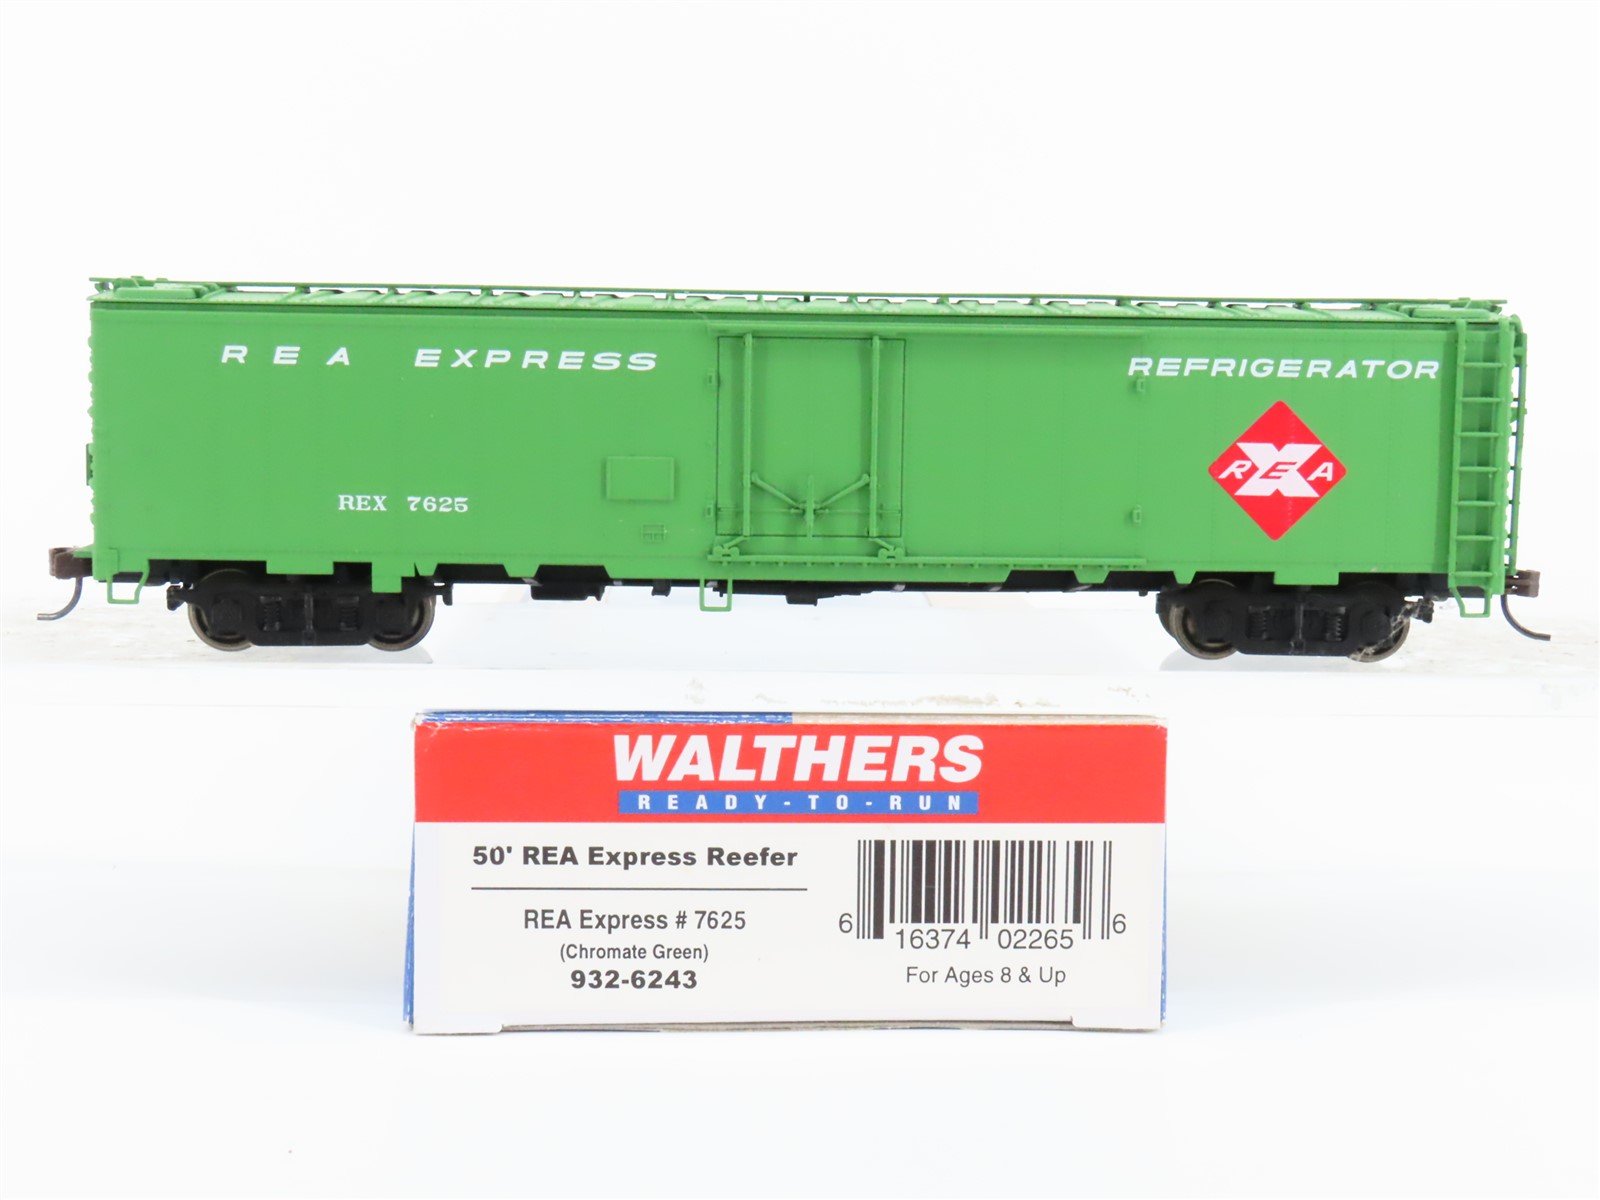 HO Scale Walthers #932-6243 REX 50' REA Express Reefer #7625 (Chromate Green)